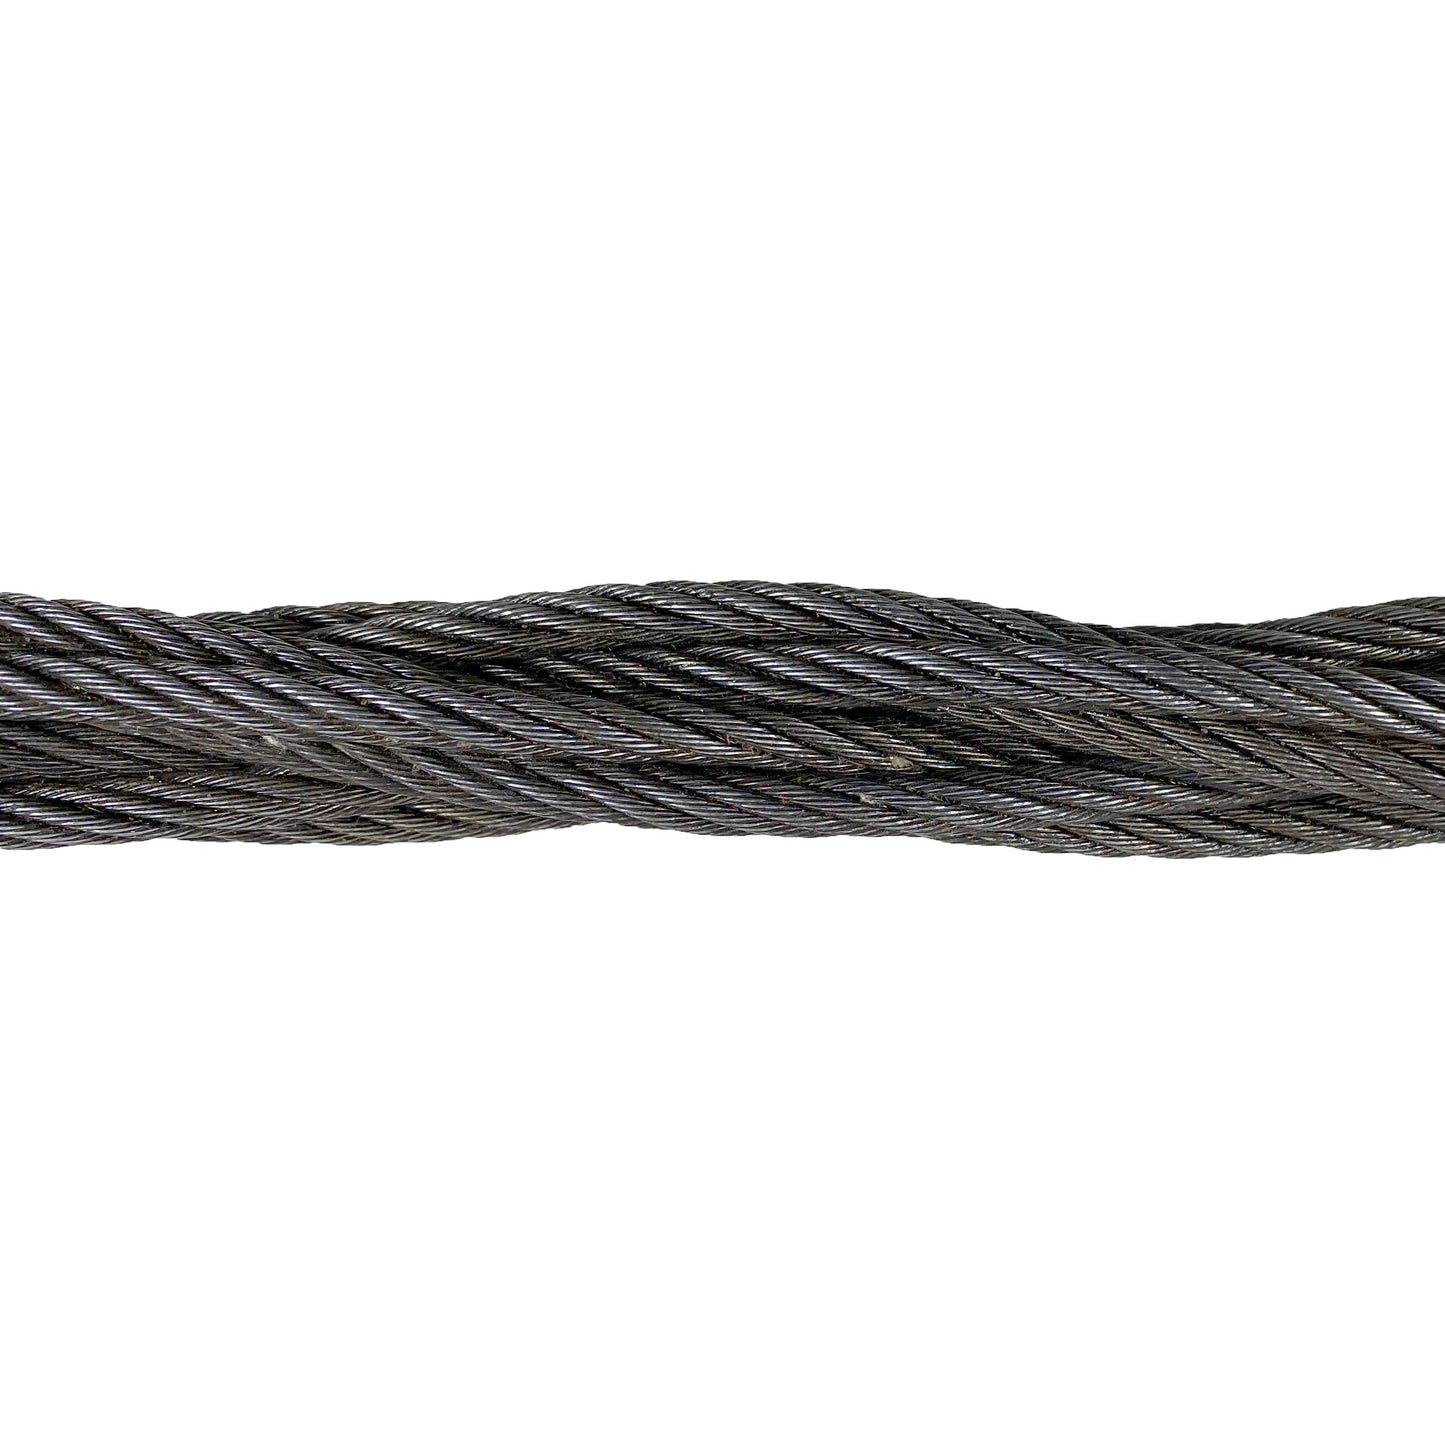 138 inch x 16 foot Nine Part Braided Wire Rope Sling image 3 of 3